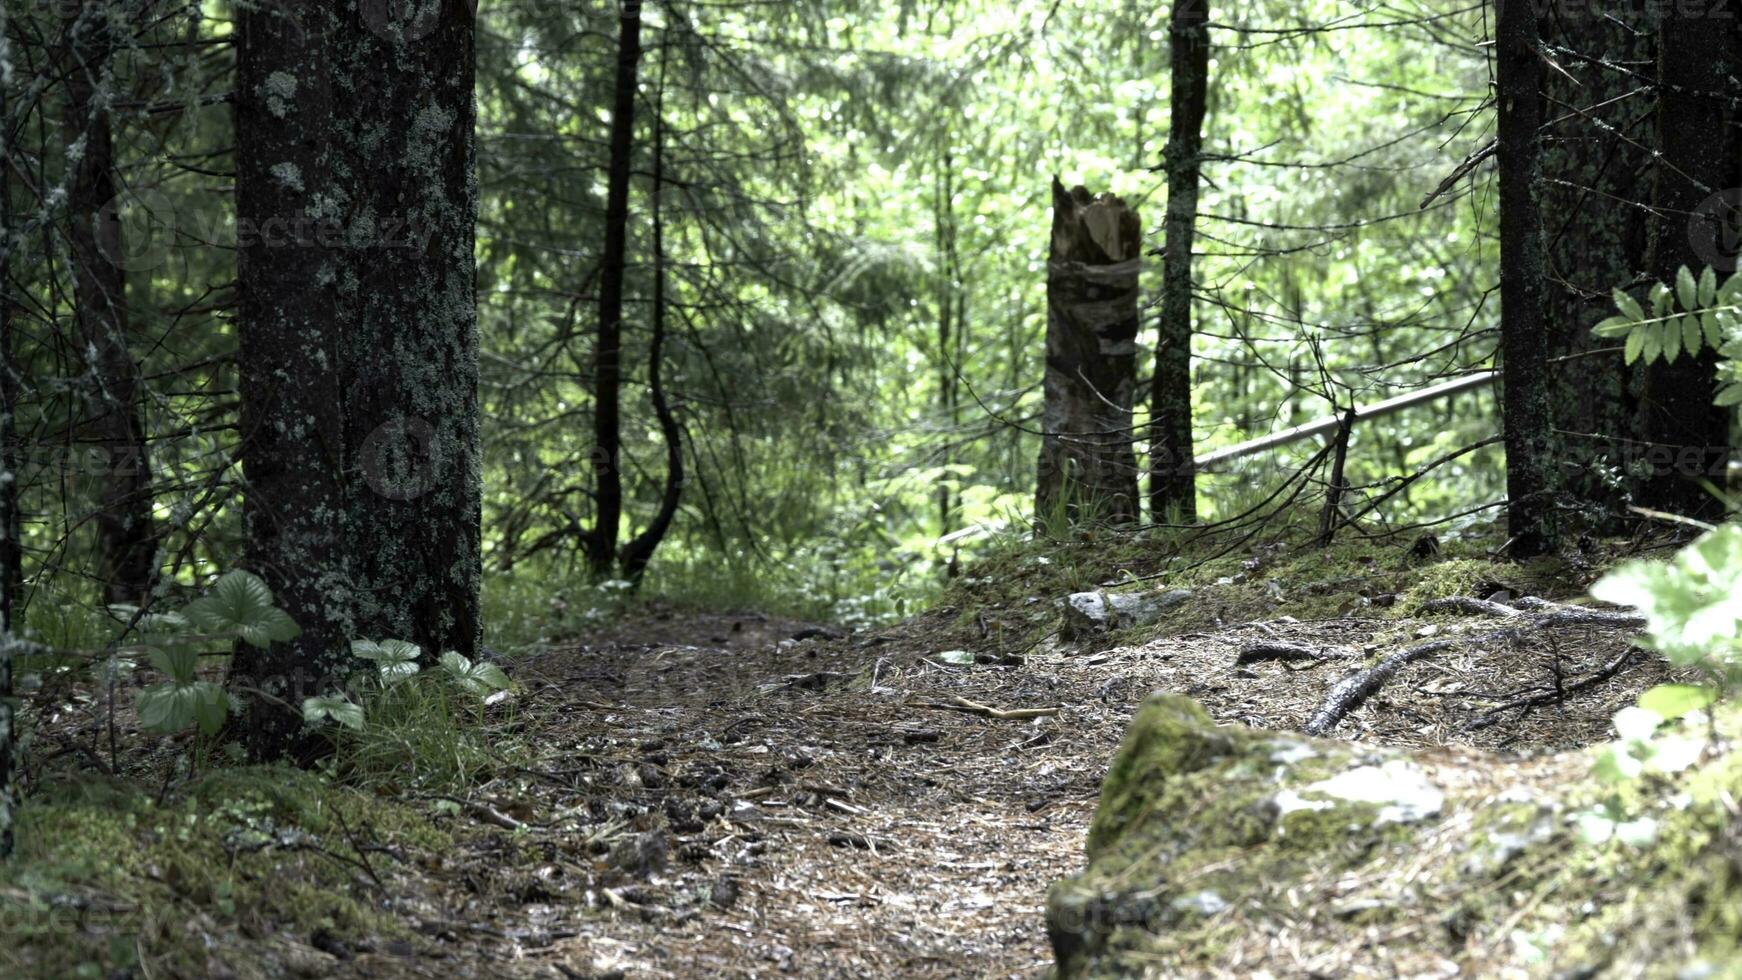 Large boulder covered with moss in the forest path with green grass and trees. Stock footage. Forest roads and trails, moss covers a large stone in the forest. photo